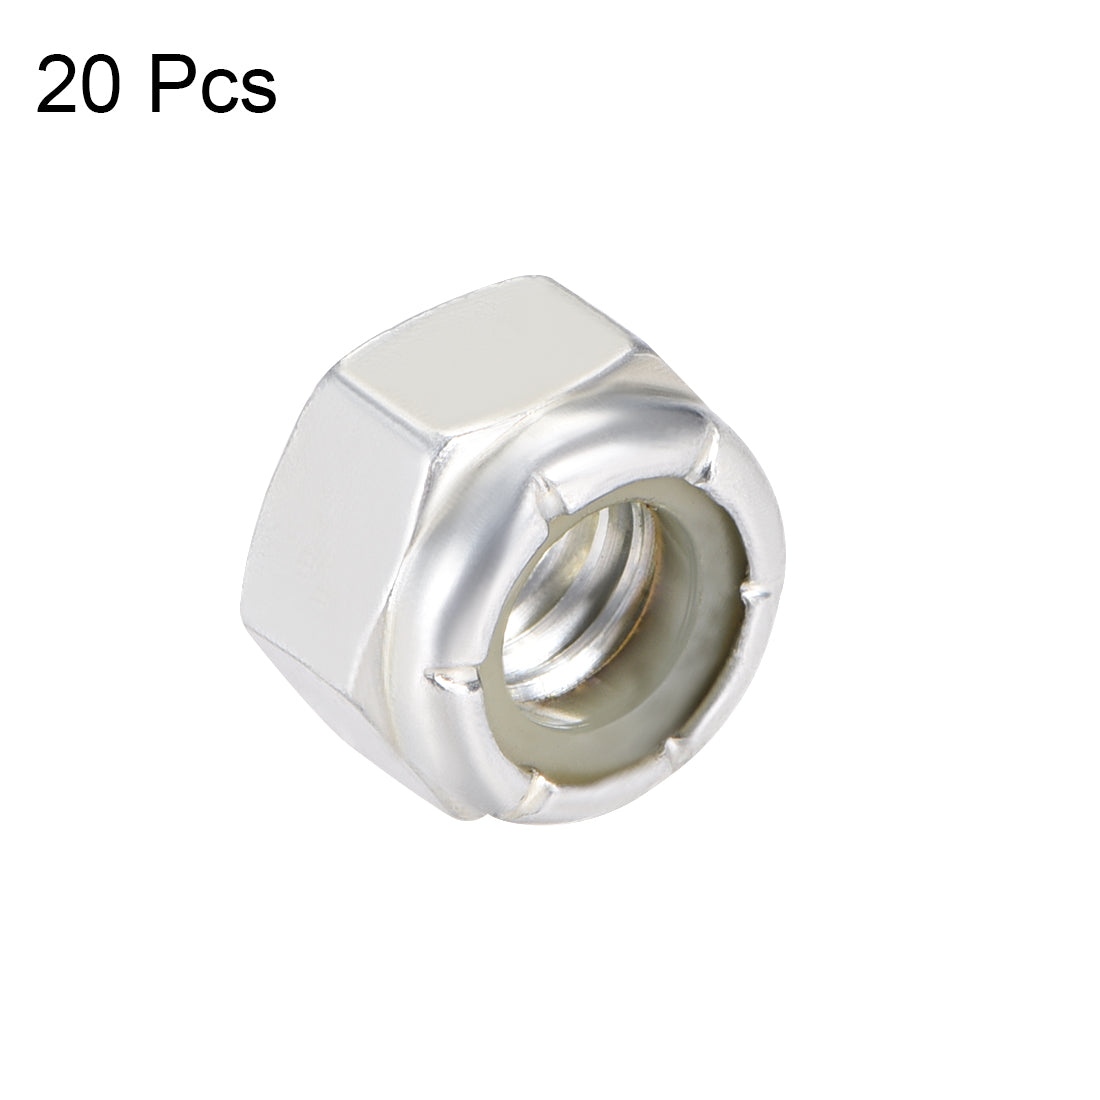 uxcell Uxcell 5/16“-18 Nylon Insert Hex Lock Nuts, Carbon Steel White Zinc Plated, 20 Pcs